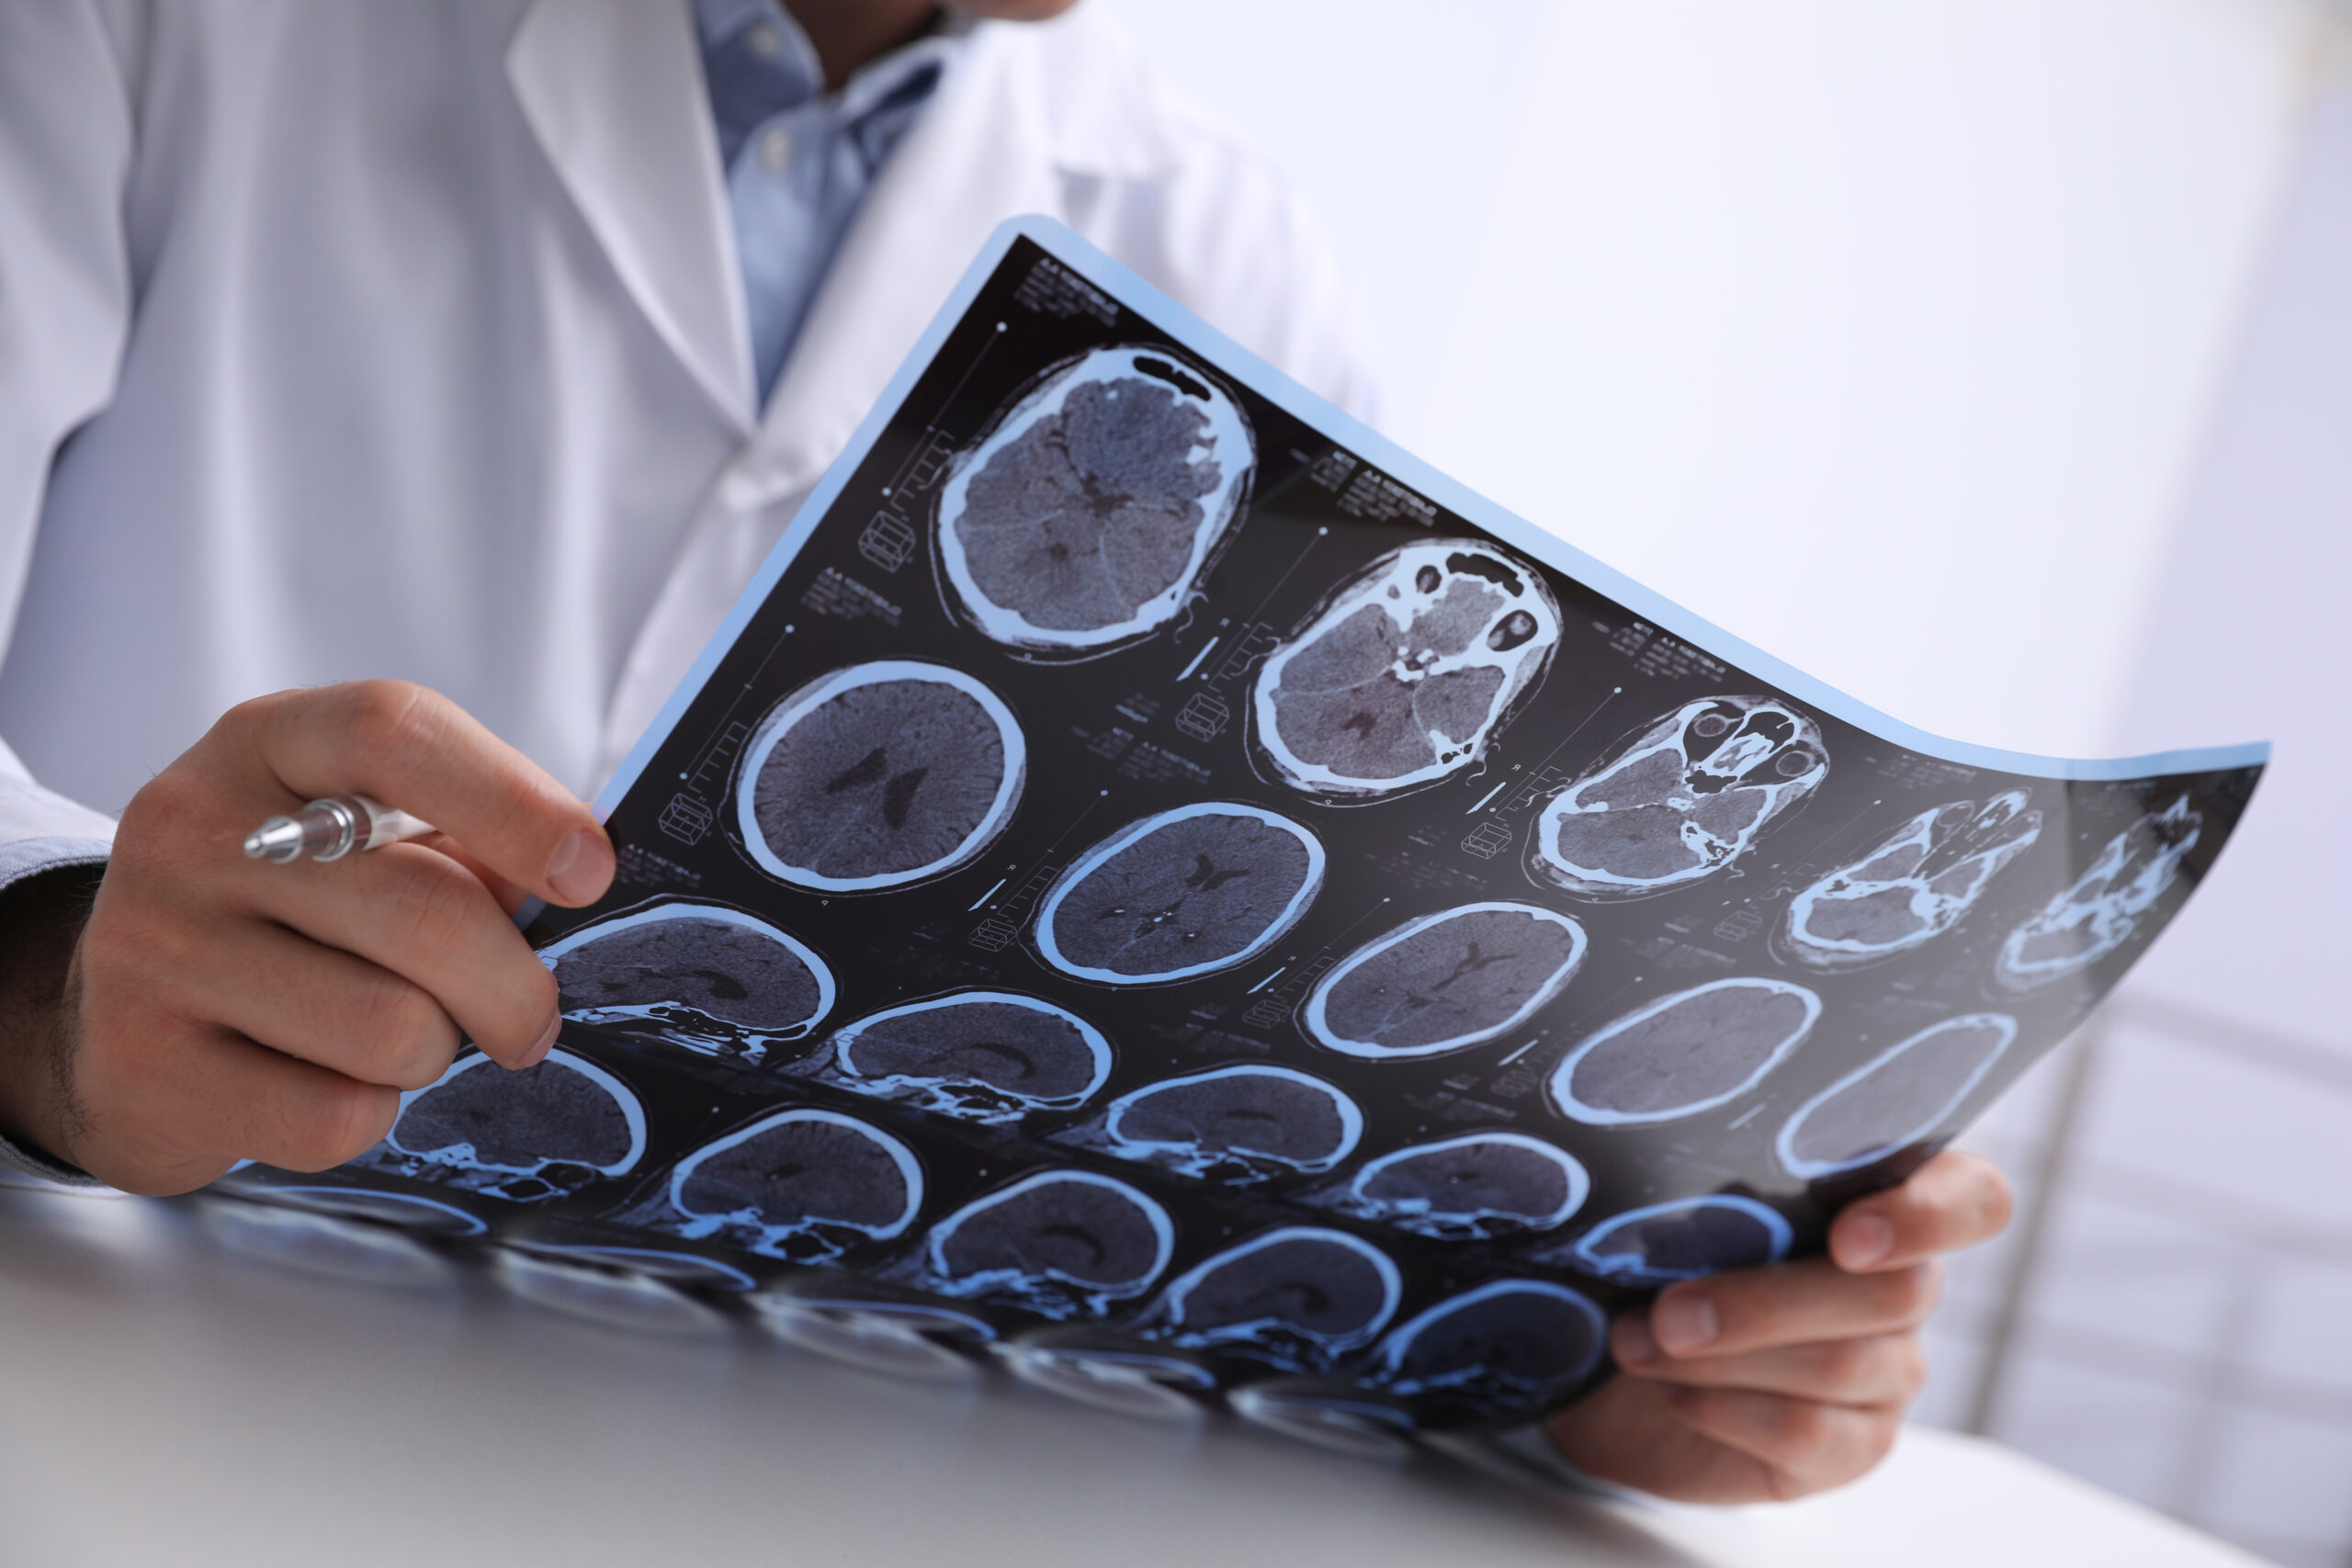 Classification of brain injuries